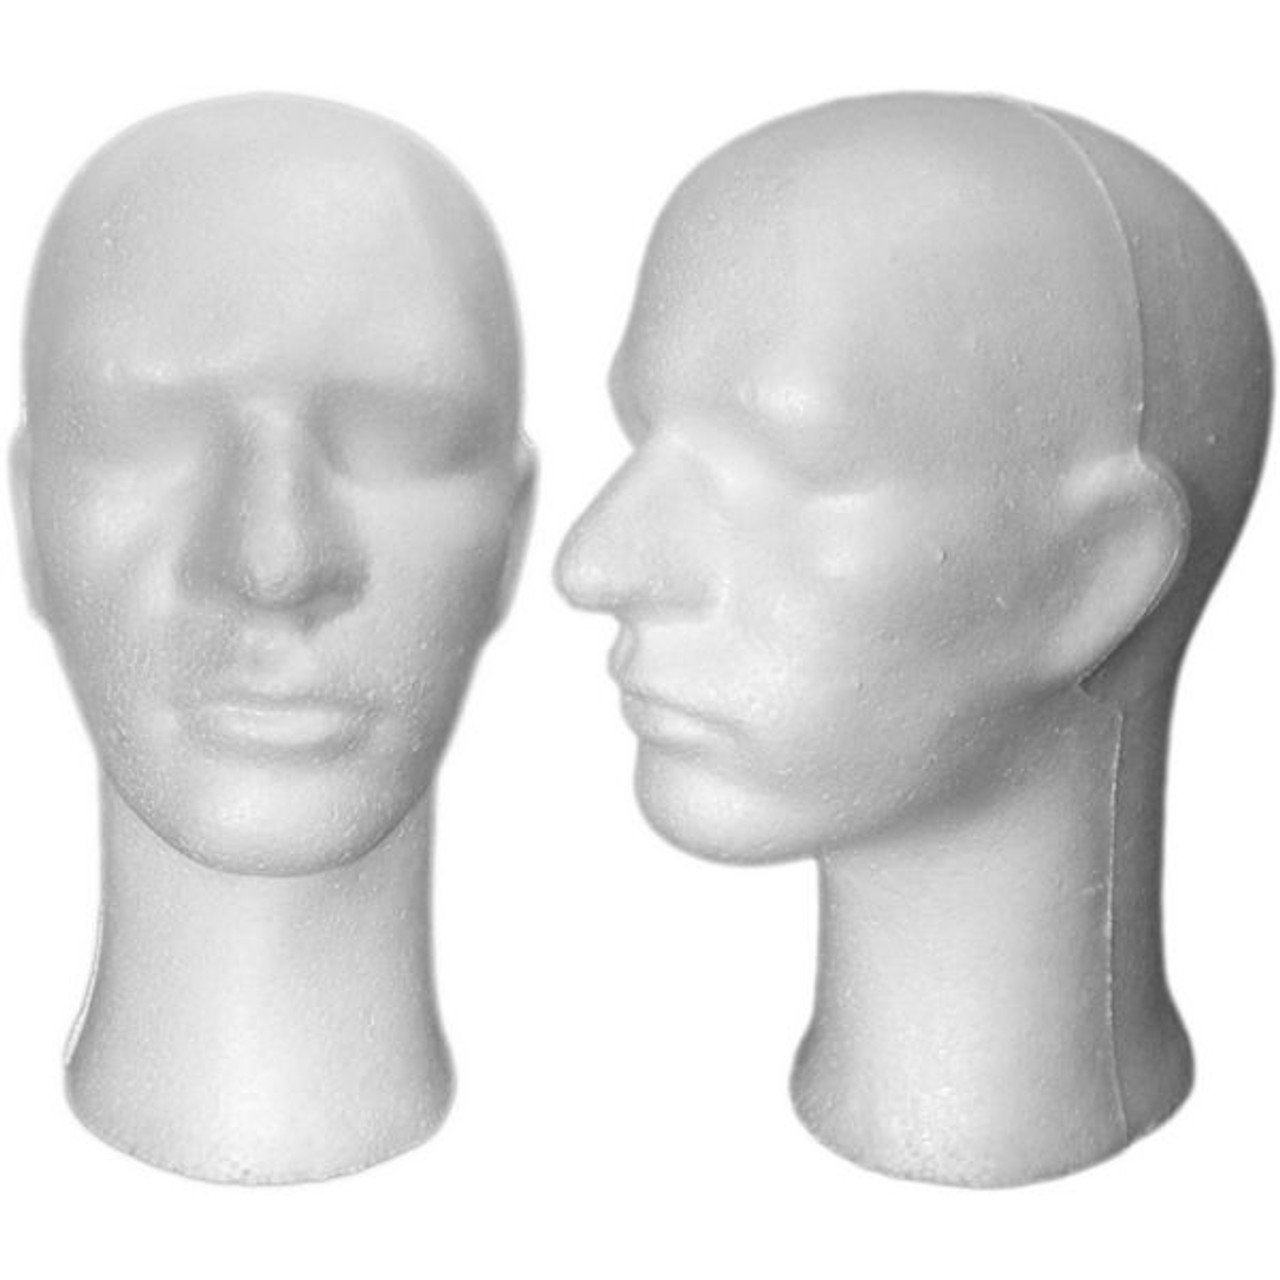 4 White Male Styrofoam Mannequin Head with Long Neck MM-256